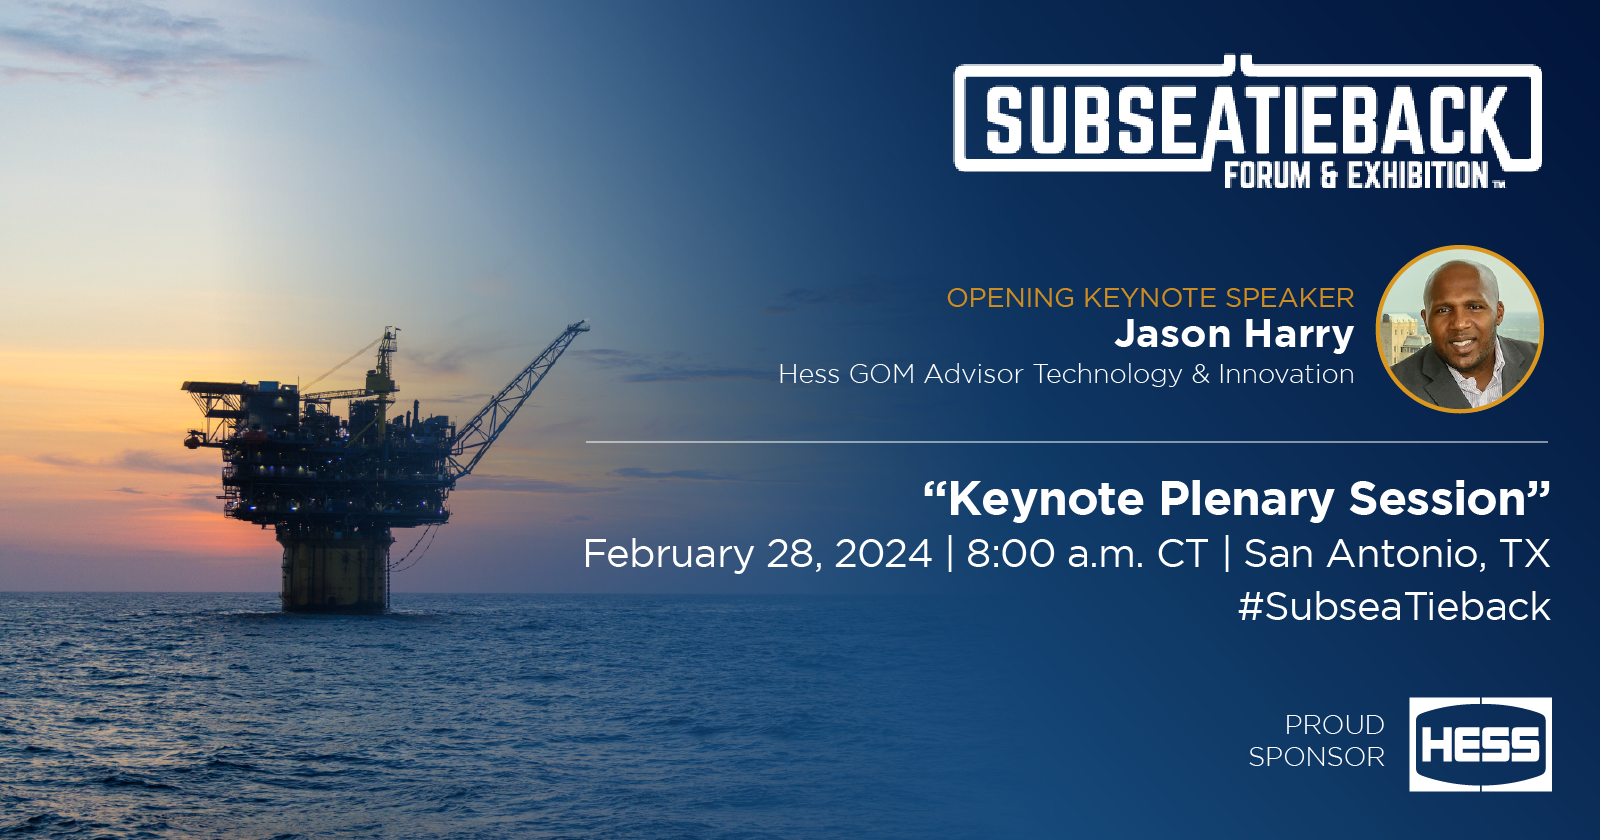 Jason Harry to Deliver Opening Keynote at Subsea Tieback Forum &amp; Exhibition